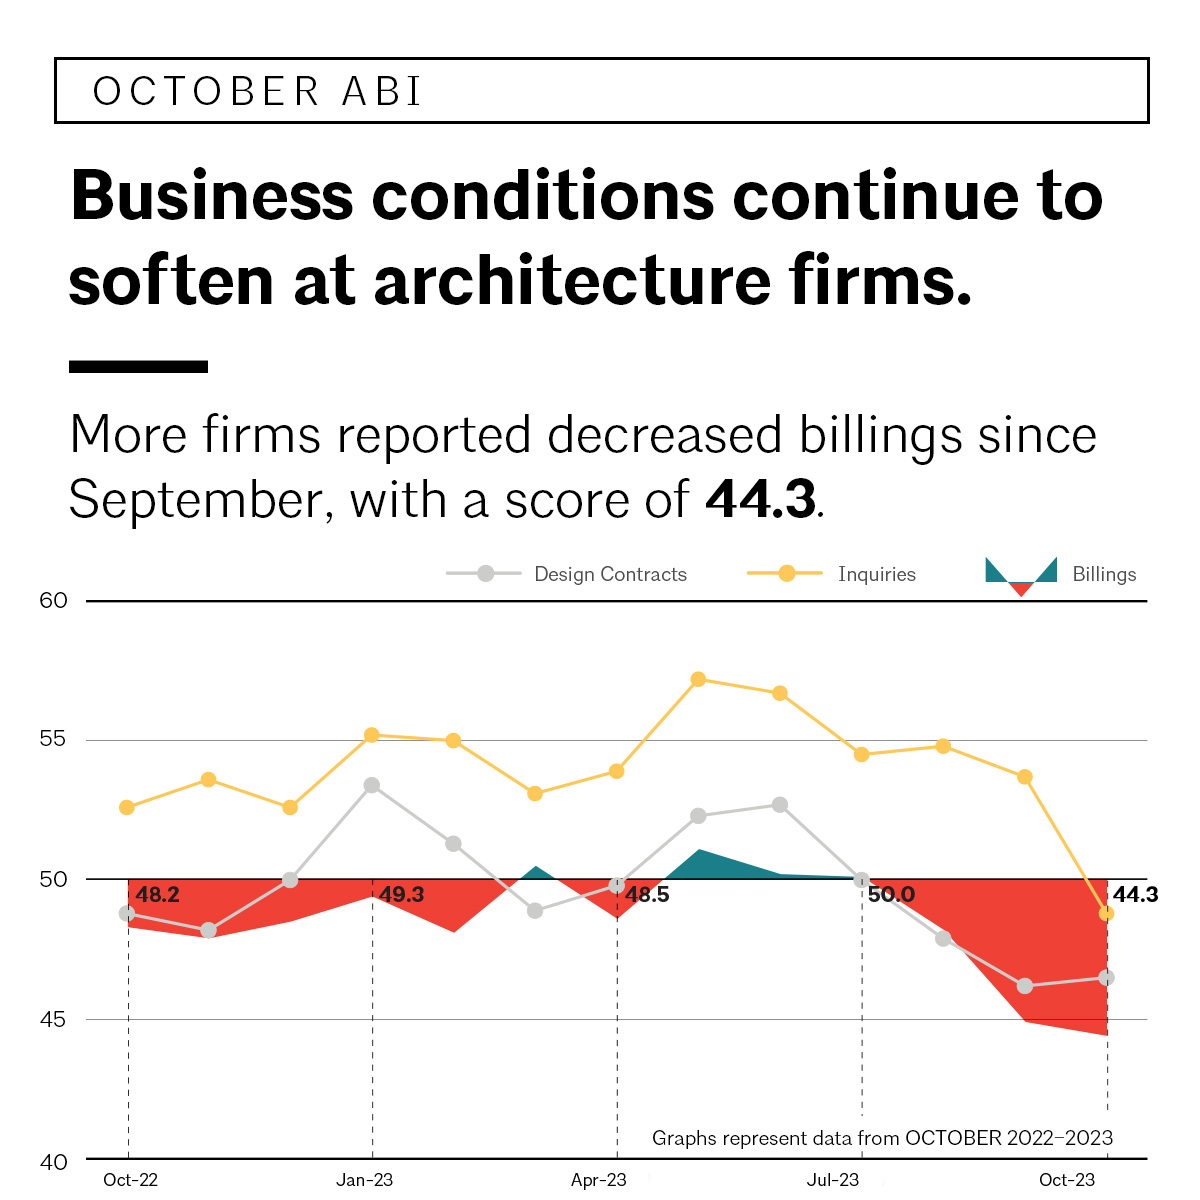 BREAKING NEWS 🚨 The AIA/@Deltek Architectural Billings Index (ABI) October score dropped from 44.8 to 44.3. 📉 For the third consecutive month, ABI was <50, indicating a significant share of firms is seeing a decline in billings. Learn more: bit.ly/49uzDds